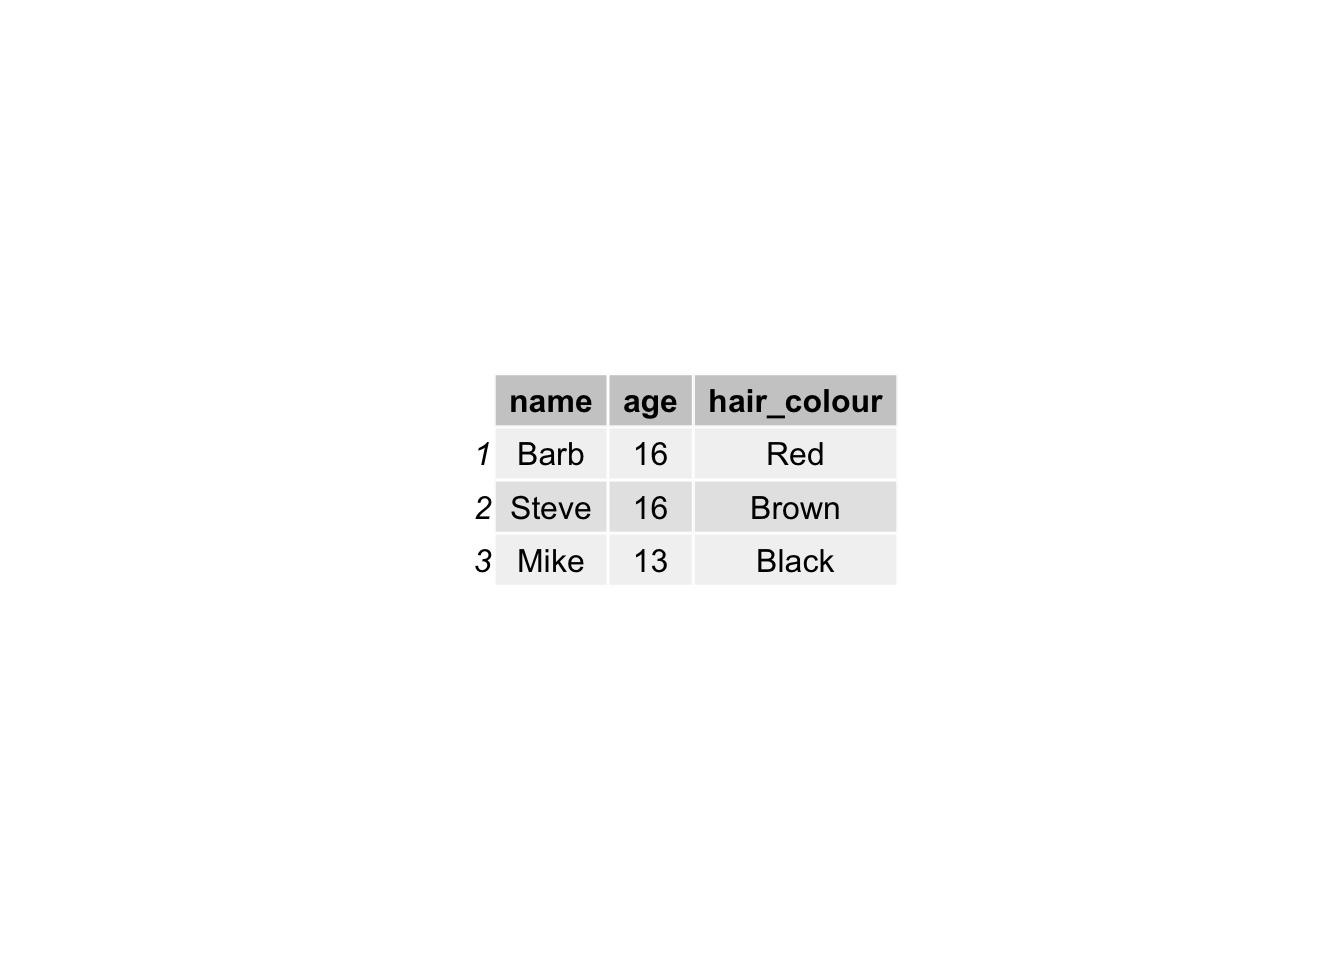 One table with three columns: name, age, and hair colour. The first row contains "Barb", with age sixteen, and a hair colour of red. The second, "Steve", sixteen, and brown, while the third "Mike", thirteen, and black.